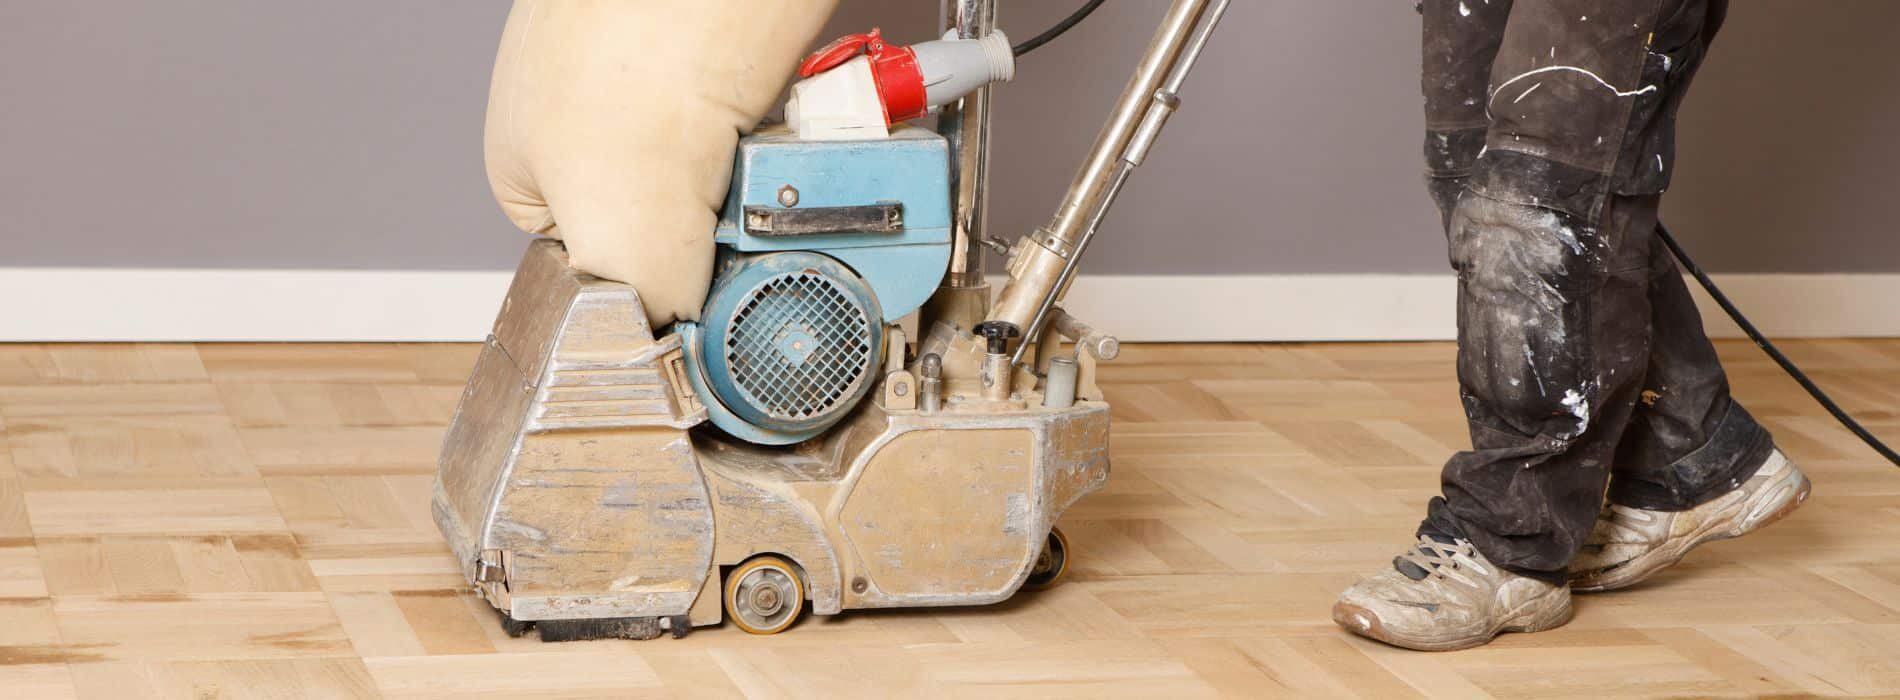 Maintaining your wood flooring